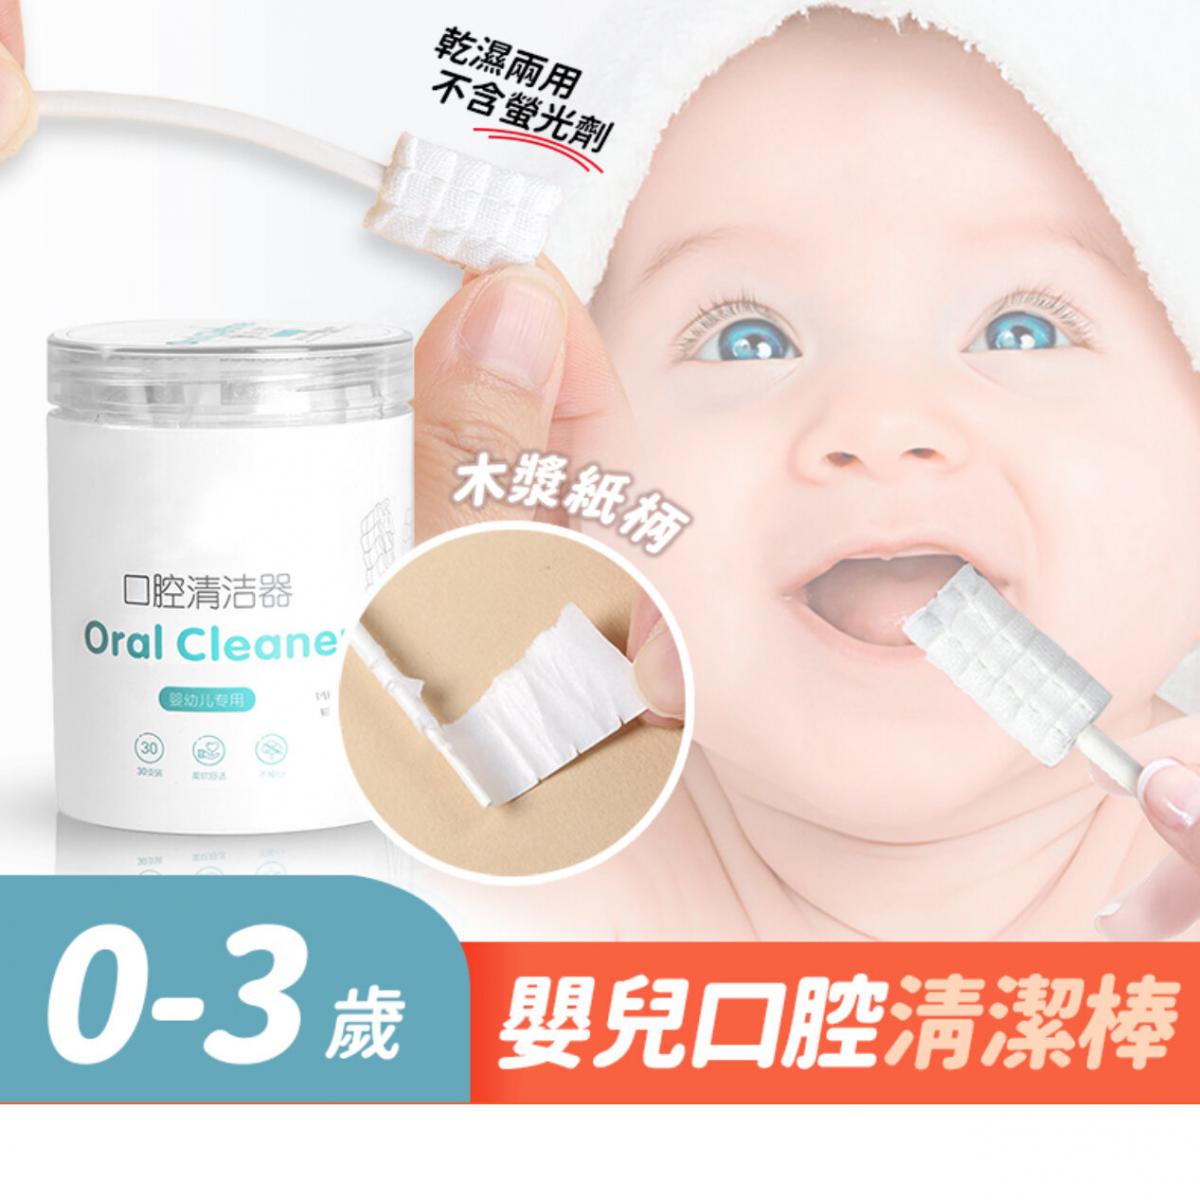 Baby oral cleaning stick 30 pieces into deciduous teeth gauze toothbrush cleaning tongue coating brush tongue brush oral cotton swab deciduous teeth cleaning brush baby toothbrush infant toothbrush oral cleaning cotton swab